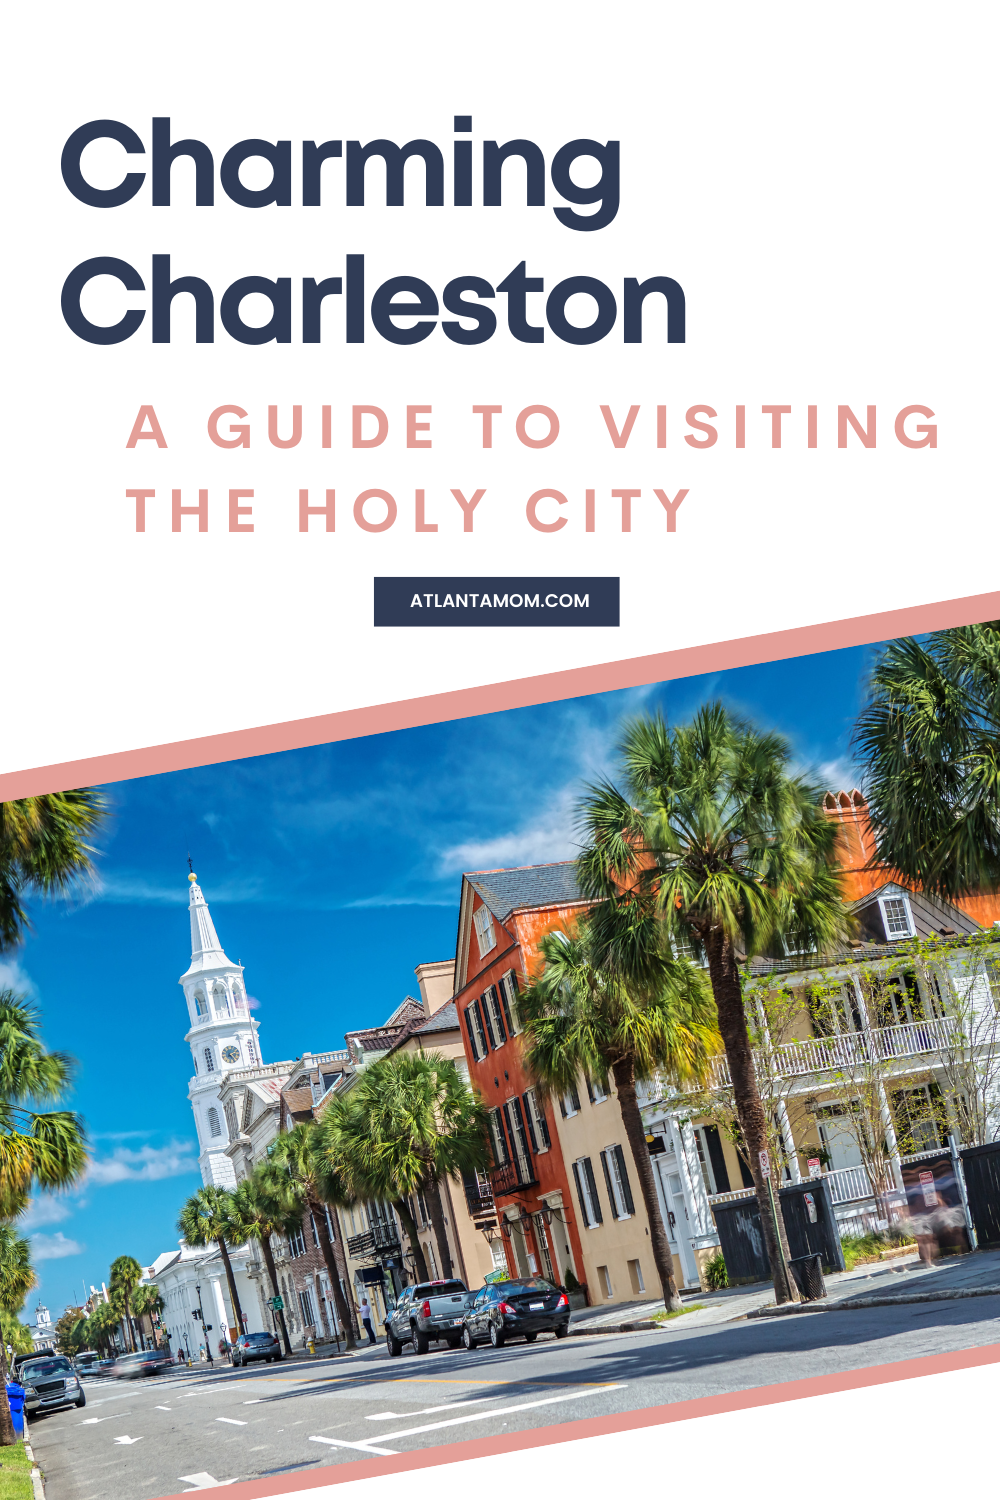 Charming Charleston - A Guide to Visiting the Holy City